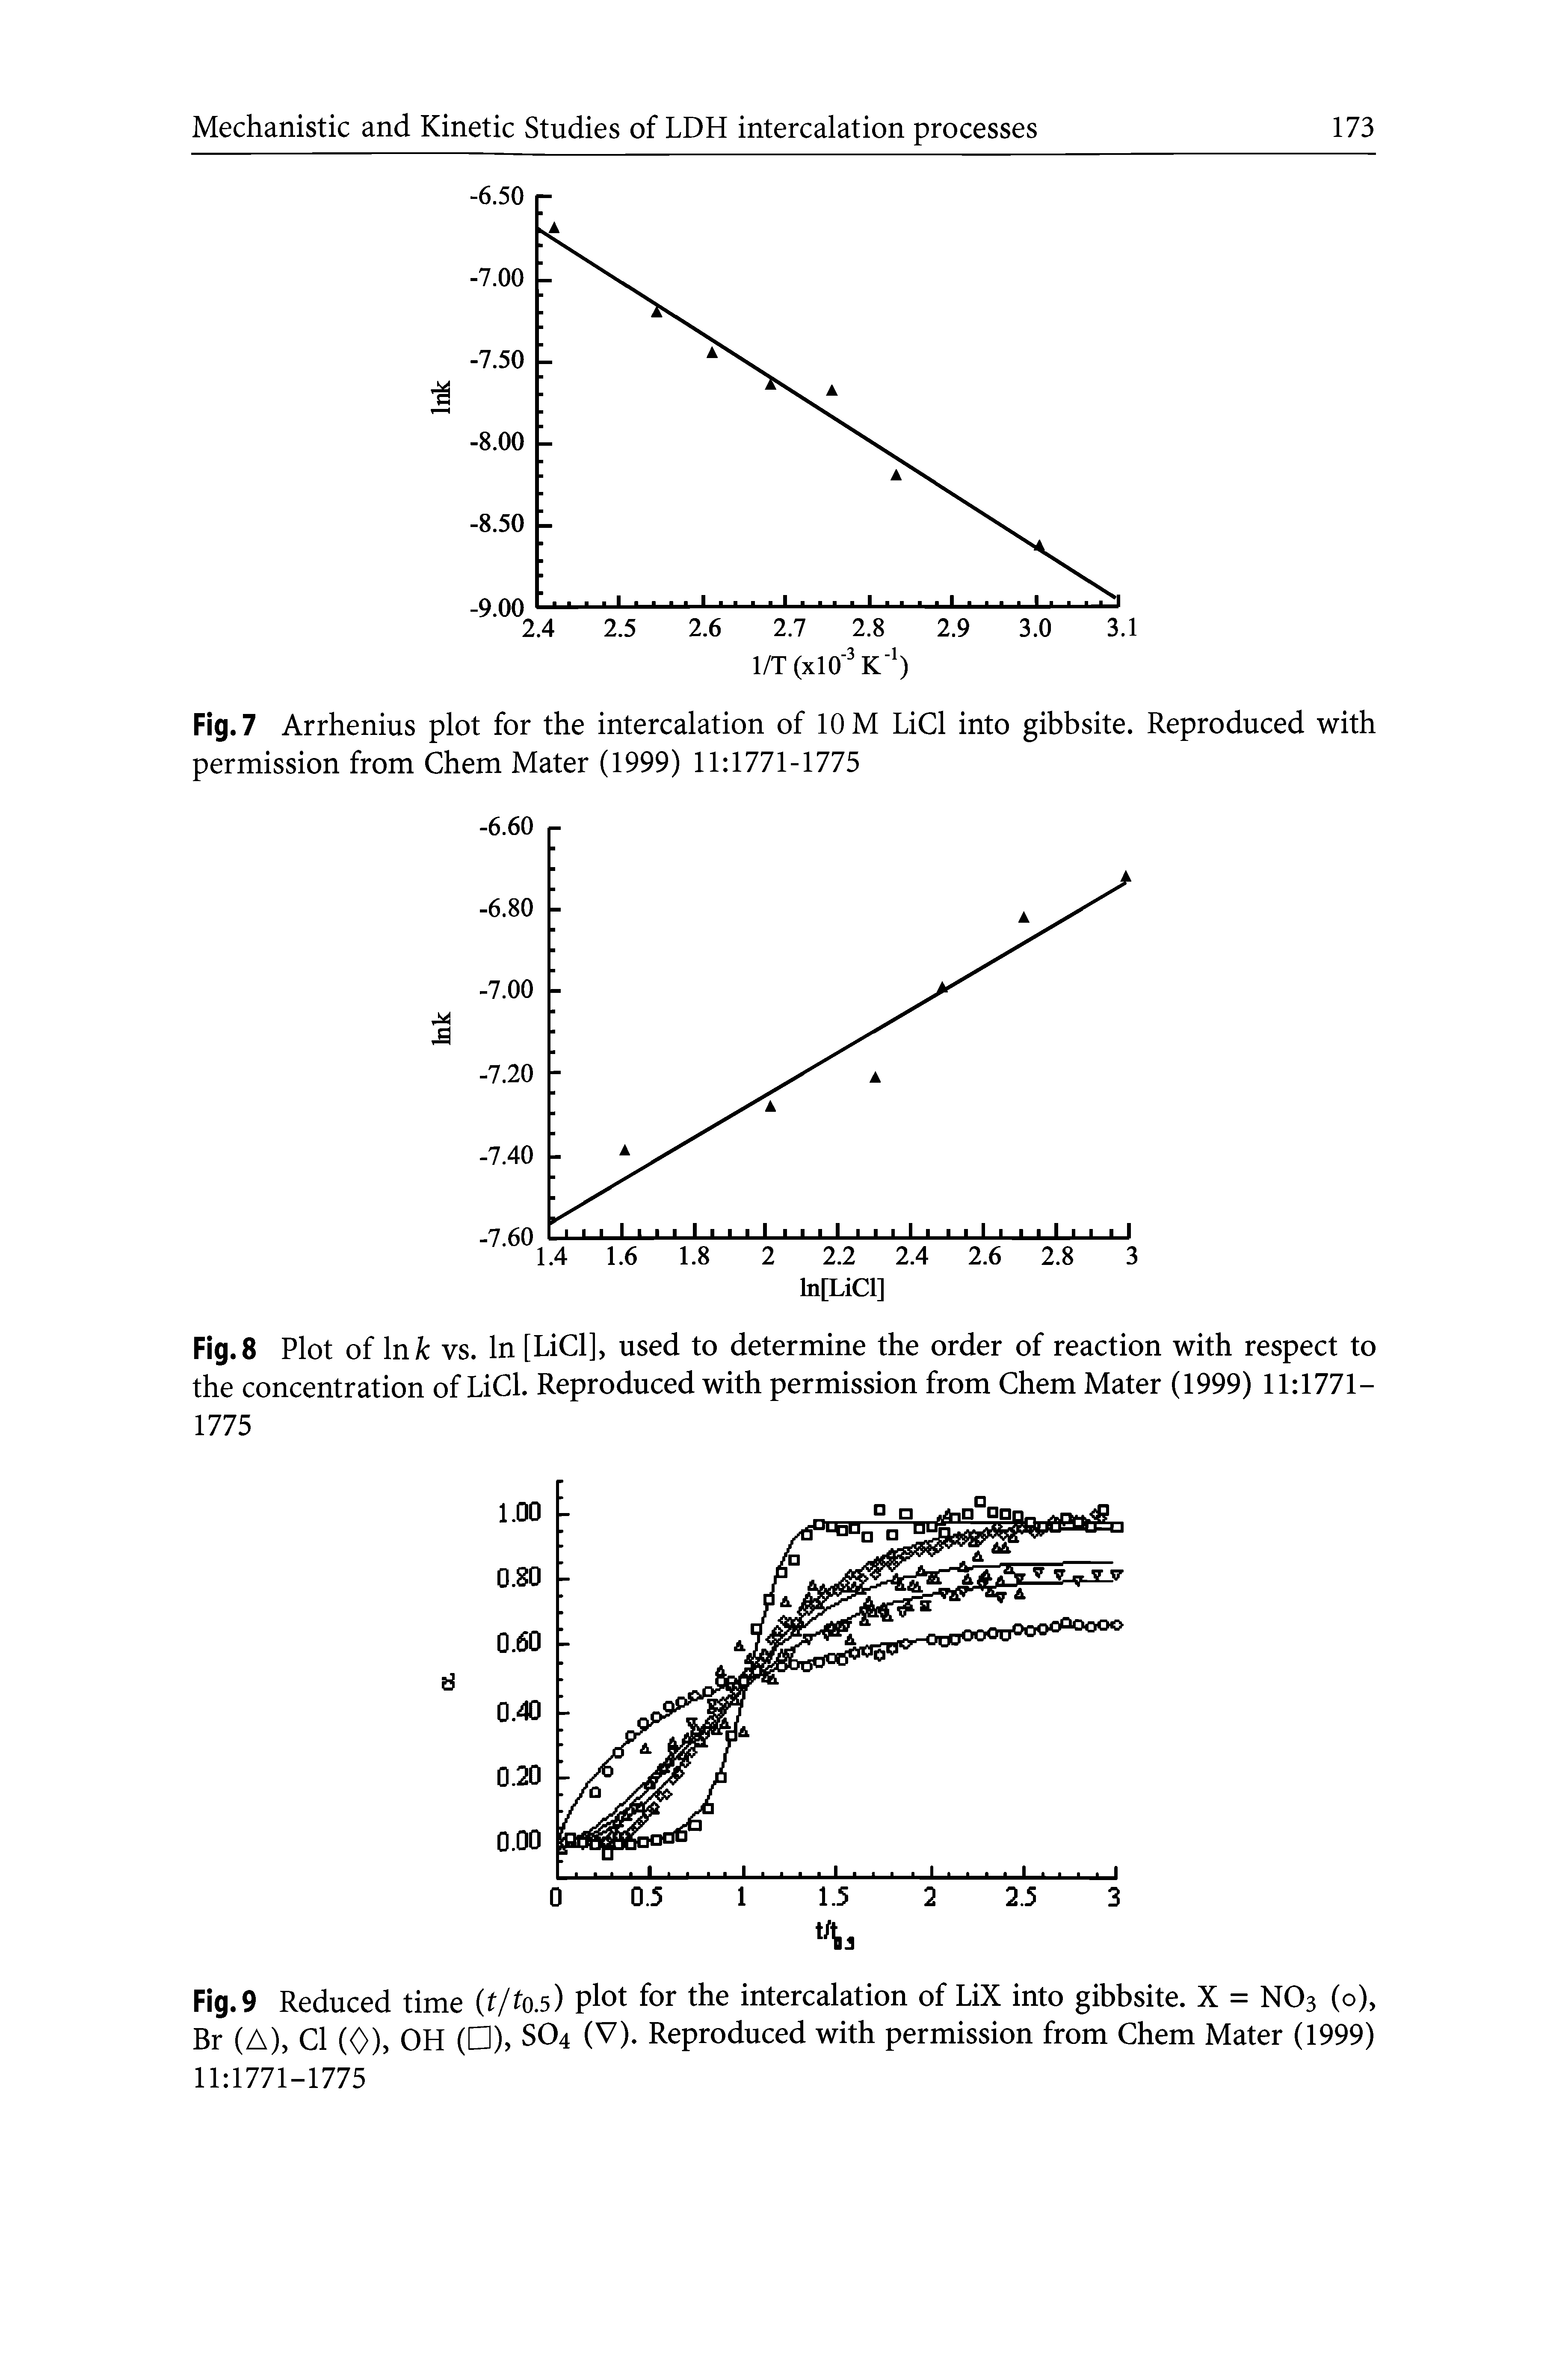 Fig. 9 Reduced time (t/to.5) plot for the intercalation of LiX into gibbsite. X = NO3 (o), Br (A), Cl (0), OH ( ), SO4 (V). Reproduced with permission from Chem Mater (1999) 11 1771-1775...